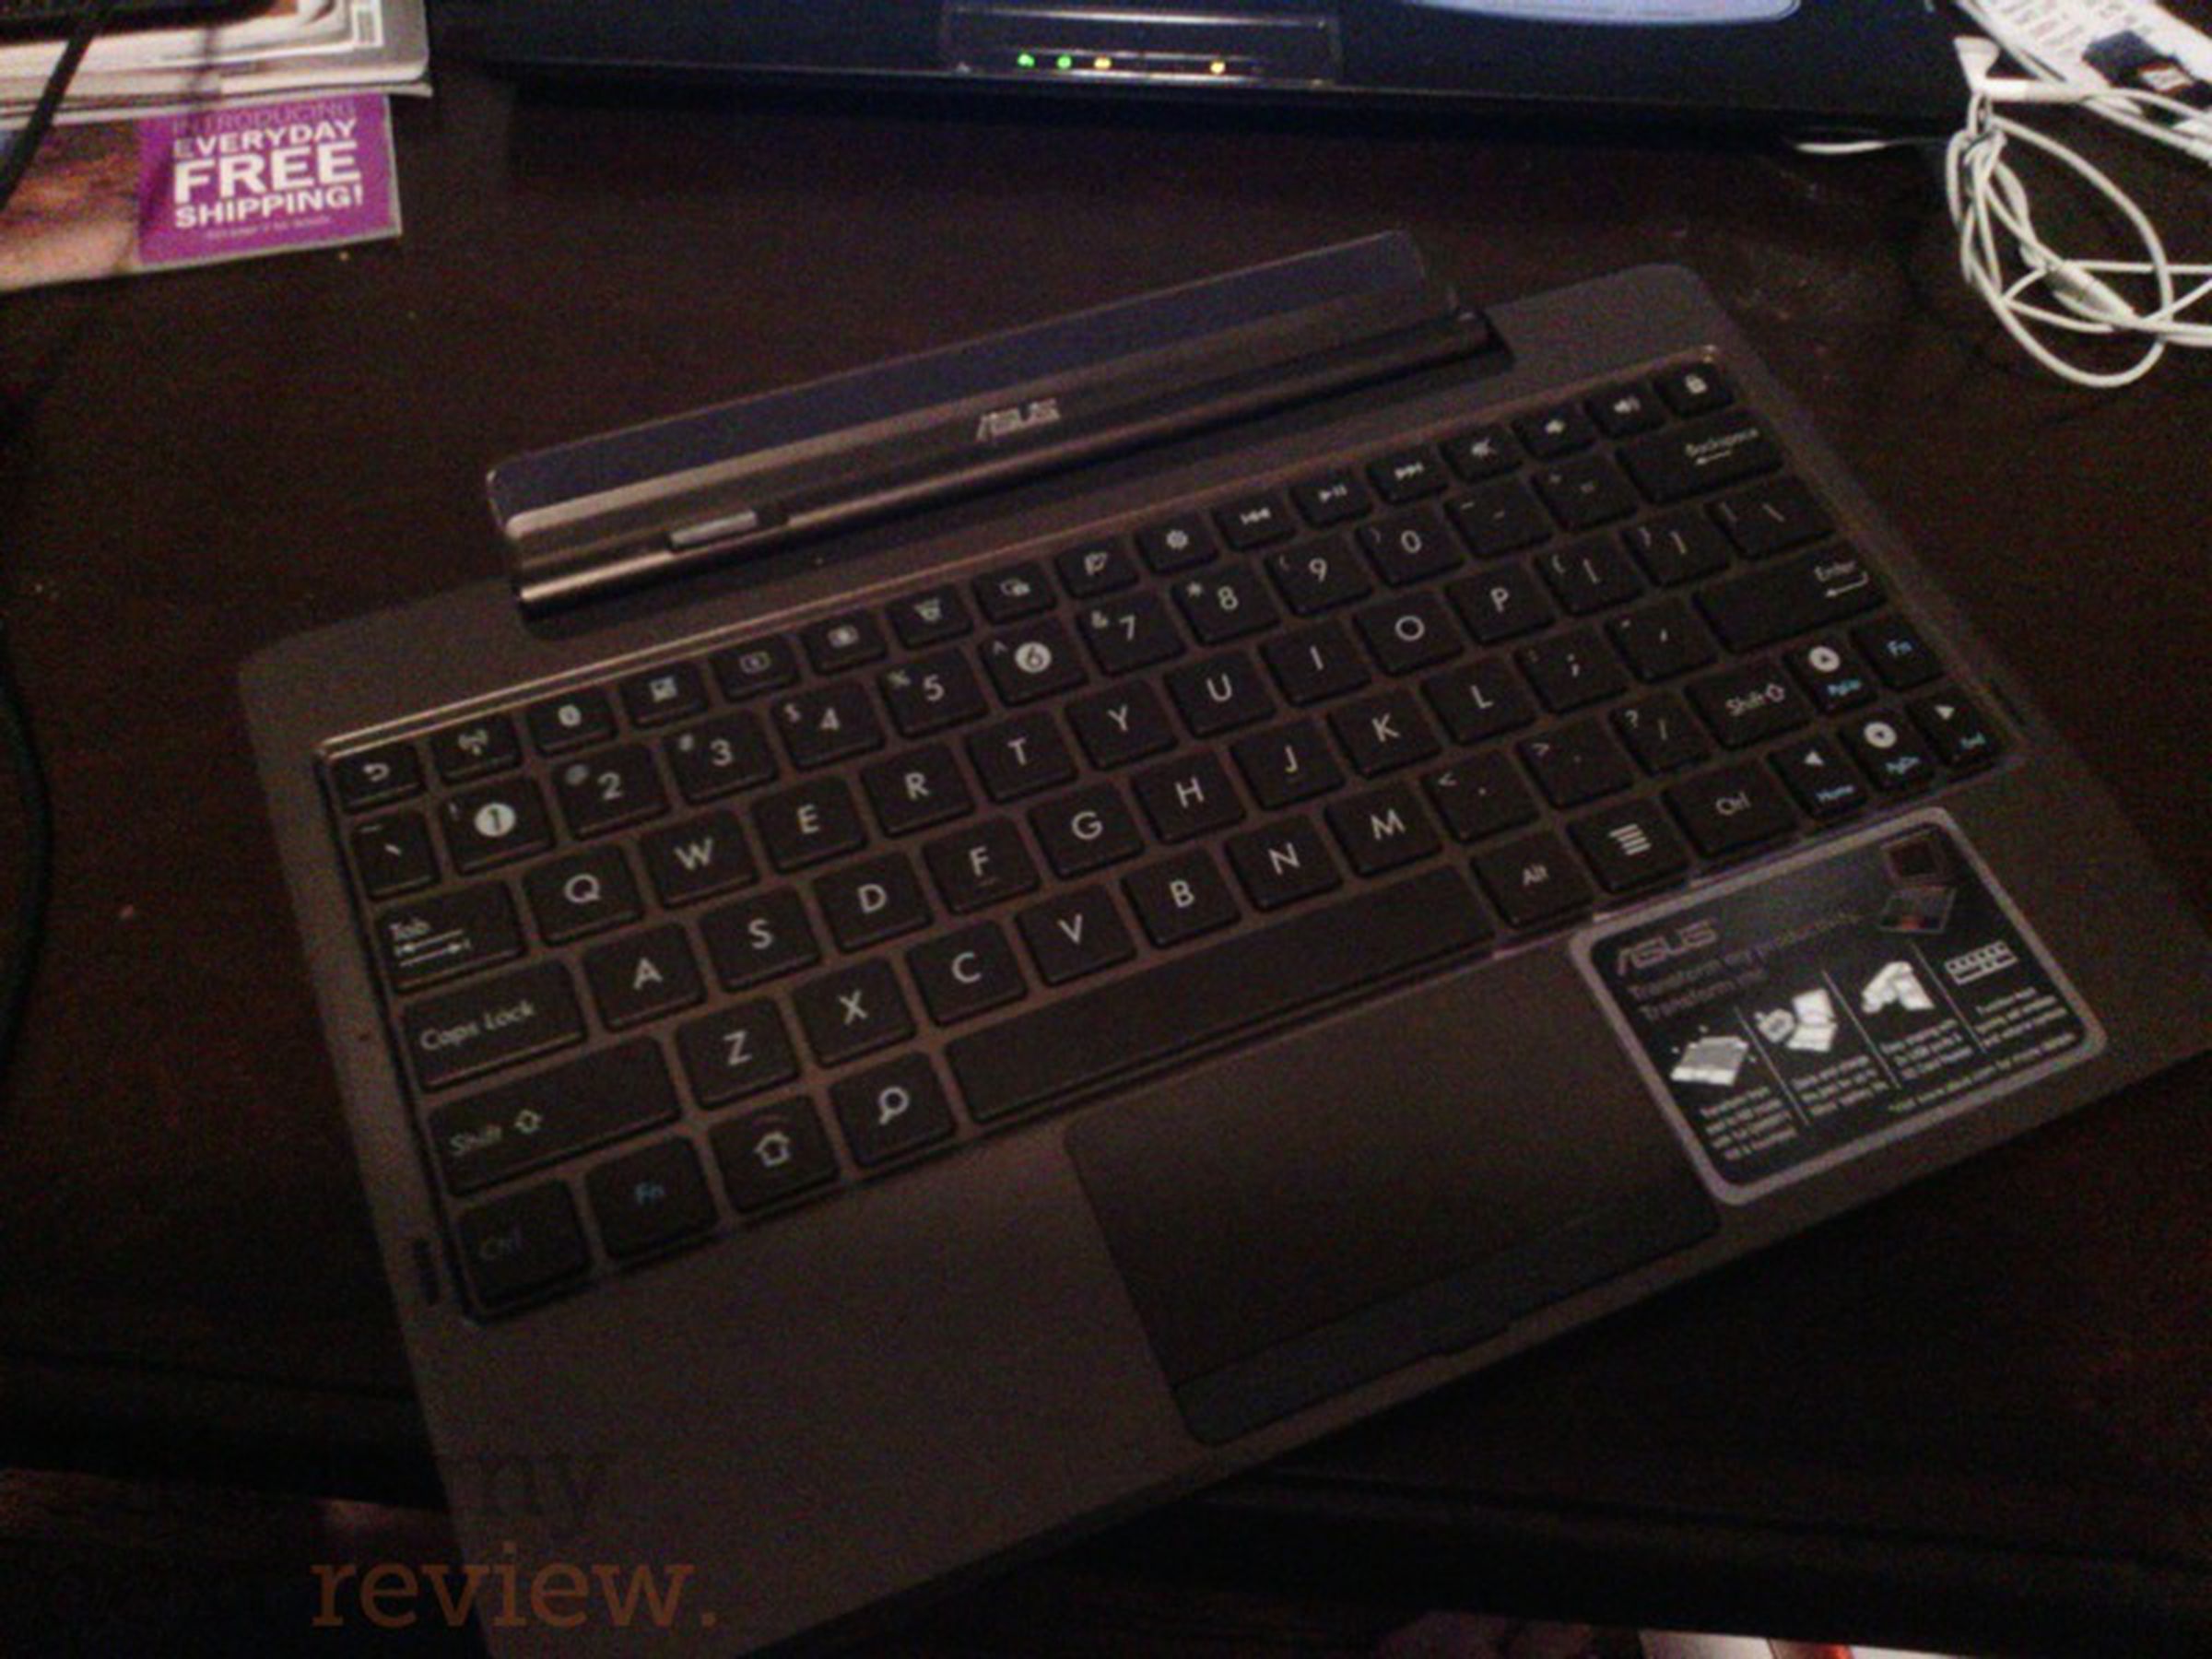 Asus Eee Pad Transformer TF101 review sample pictures